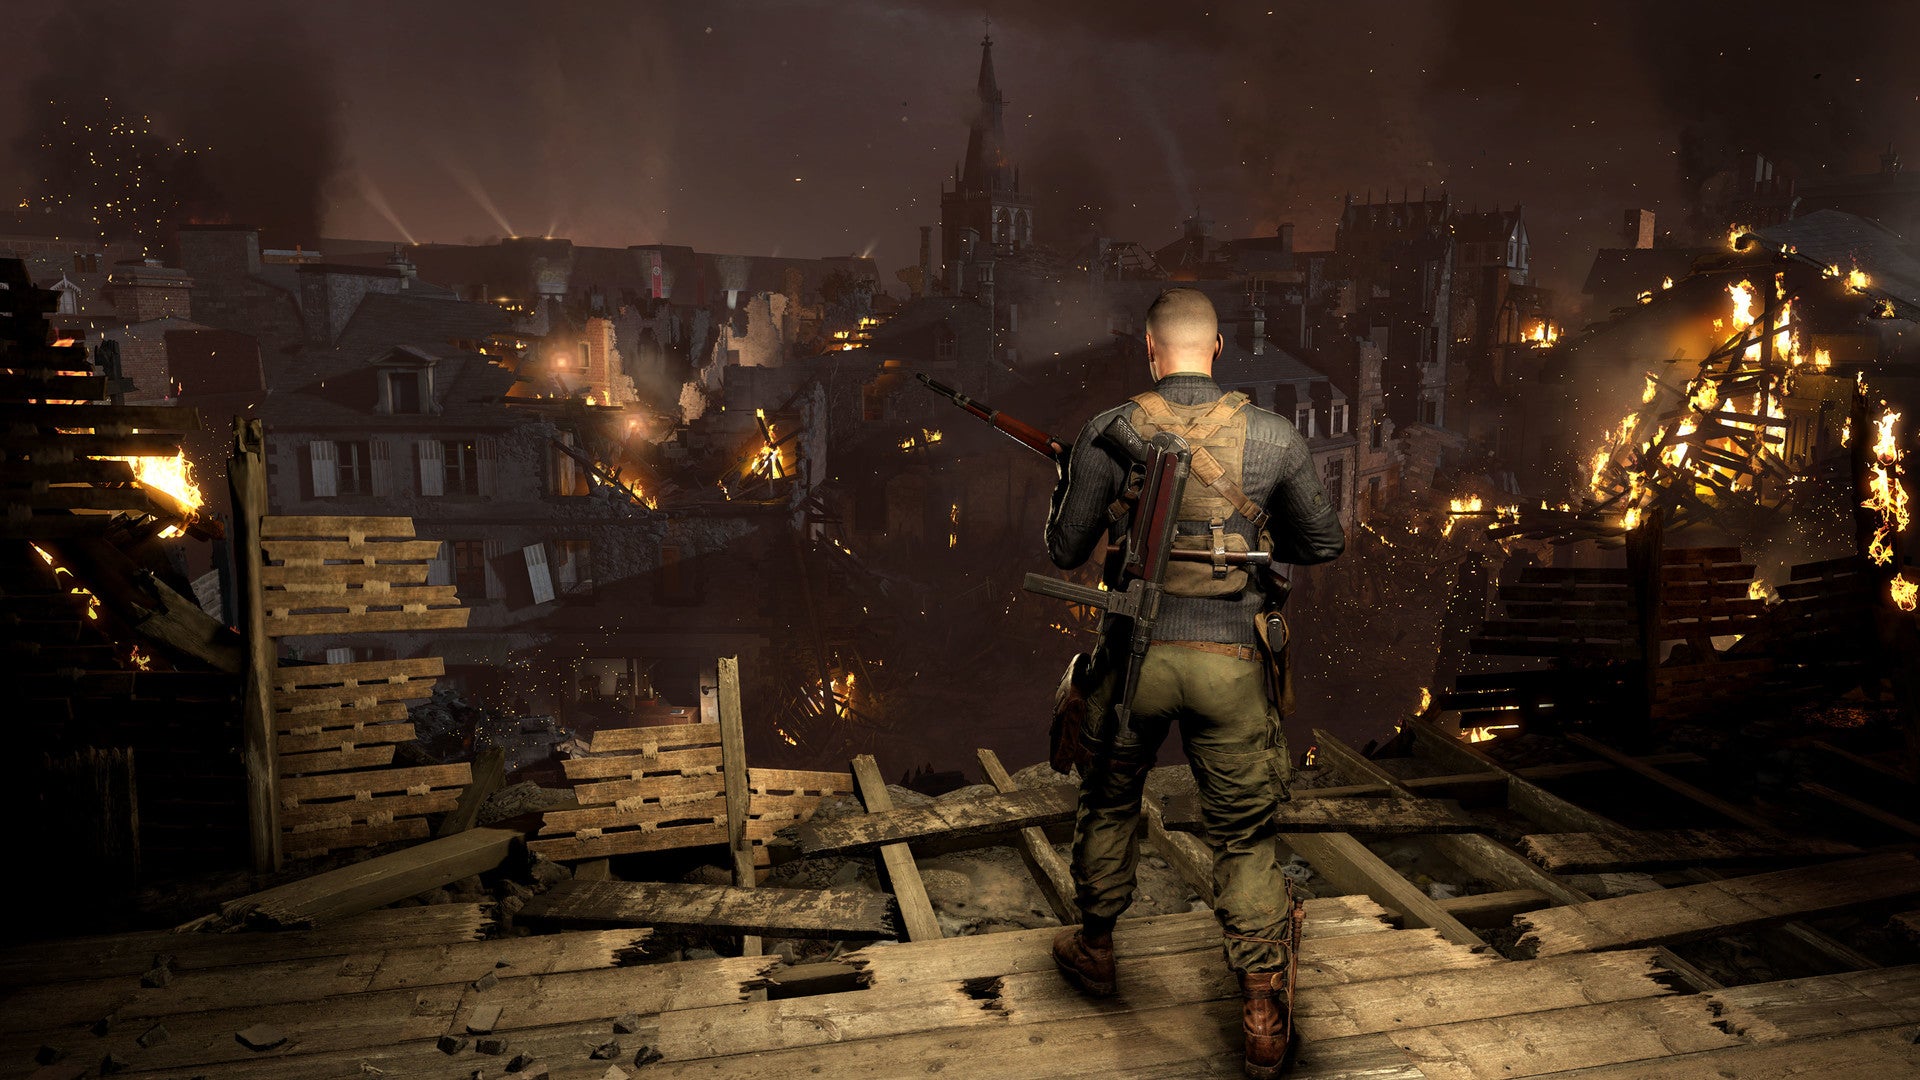 2022 best games Sniper Elite 5 - at night, dressed in black, the sniper walks out towards the edge of a platform overlooking a burning city